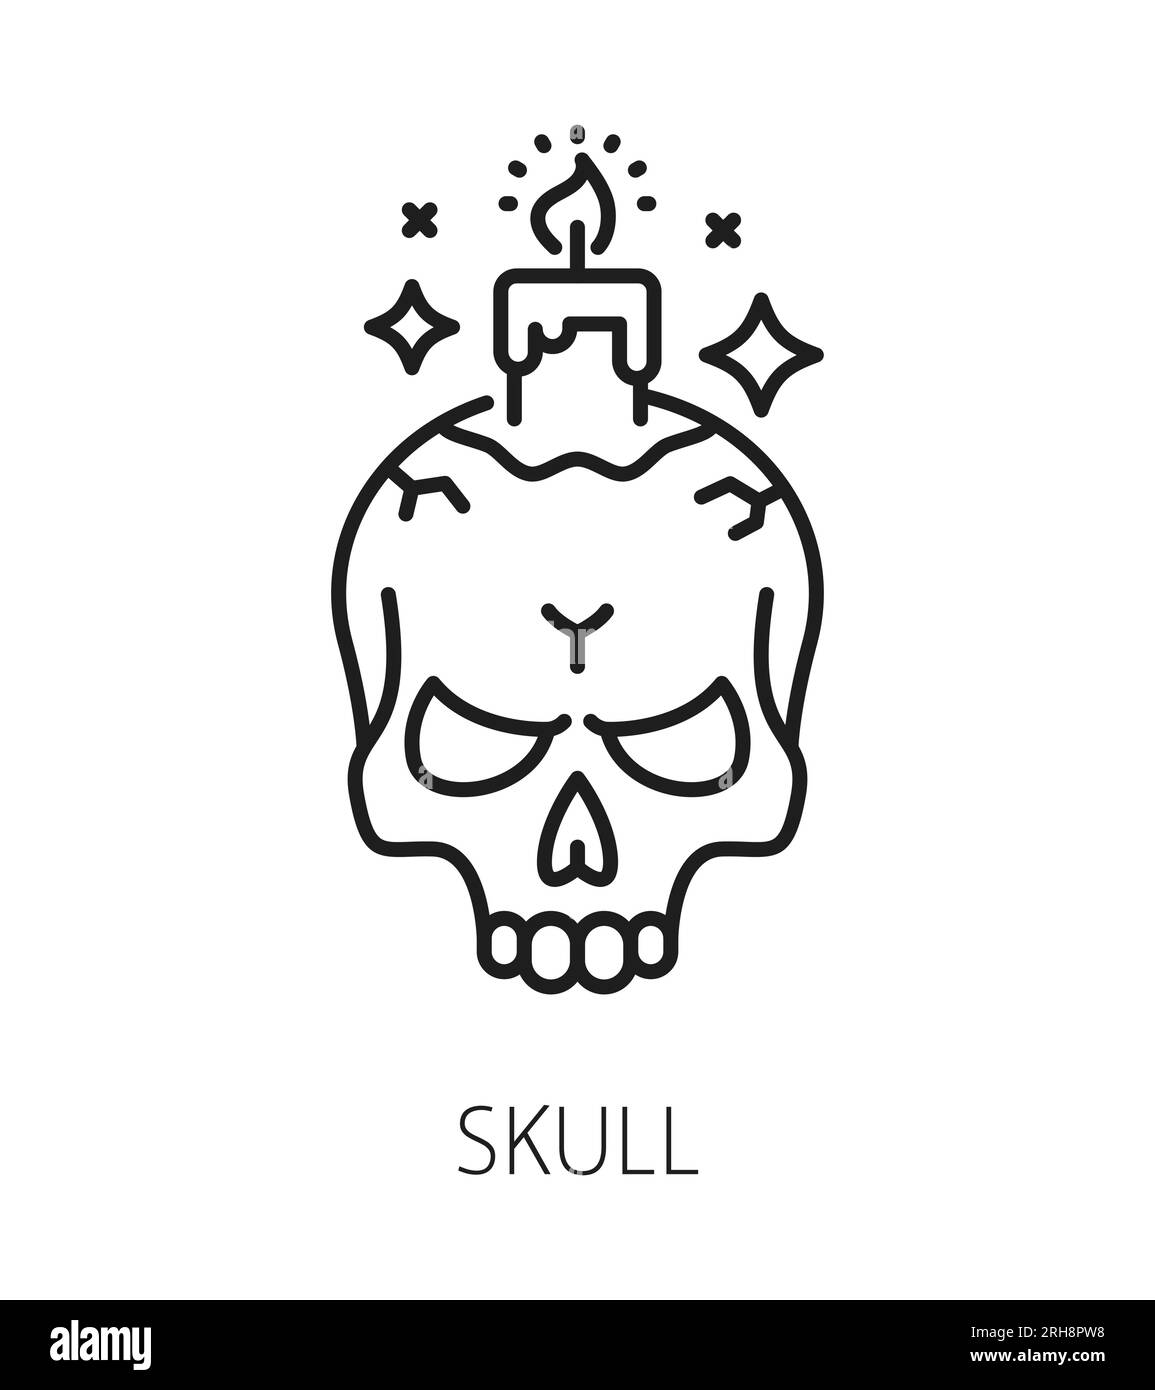 Magic skull. Witchcraft and magic icon. Mystery, esoteric, astrology symbol. Wizard or witchery item, tarot or esoteric symbol. Witchcraft line vector icon or pictogram with human skull and candle Stock Vector